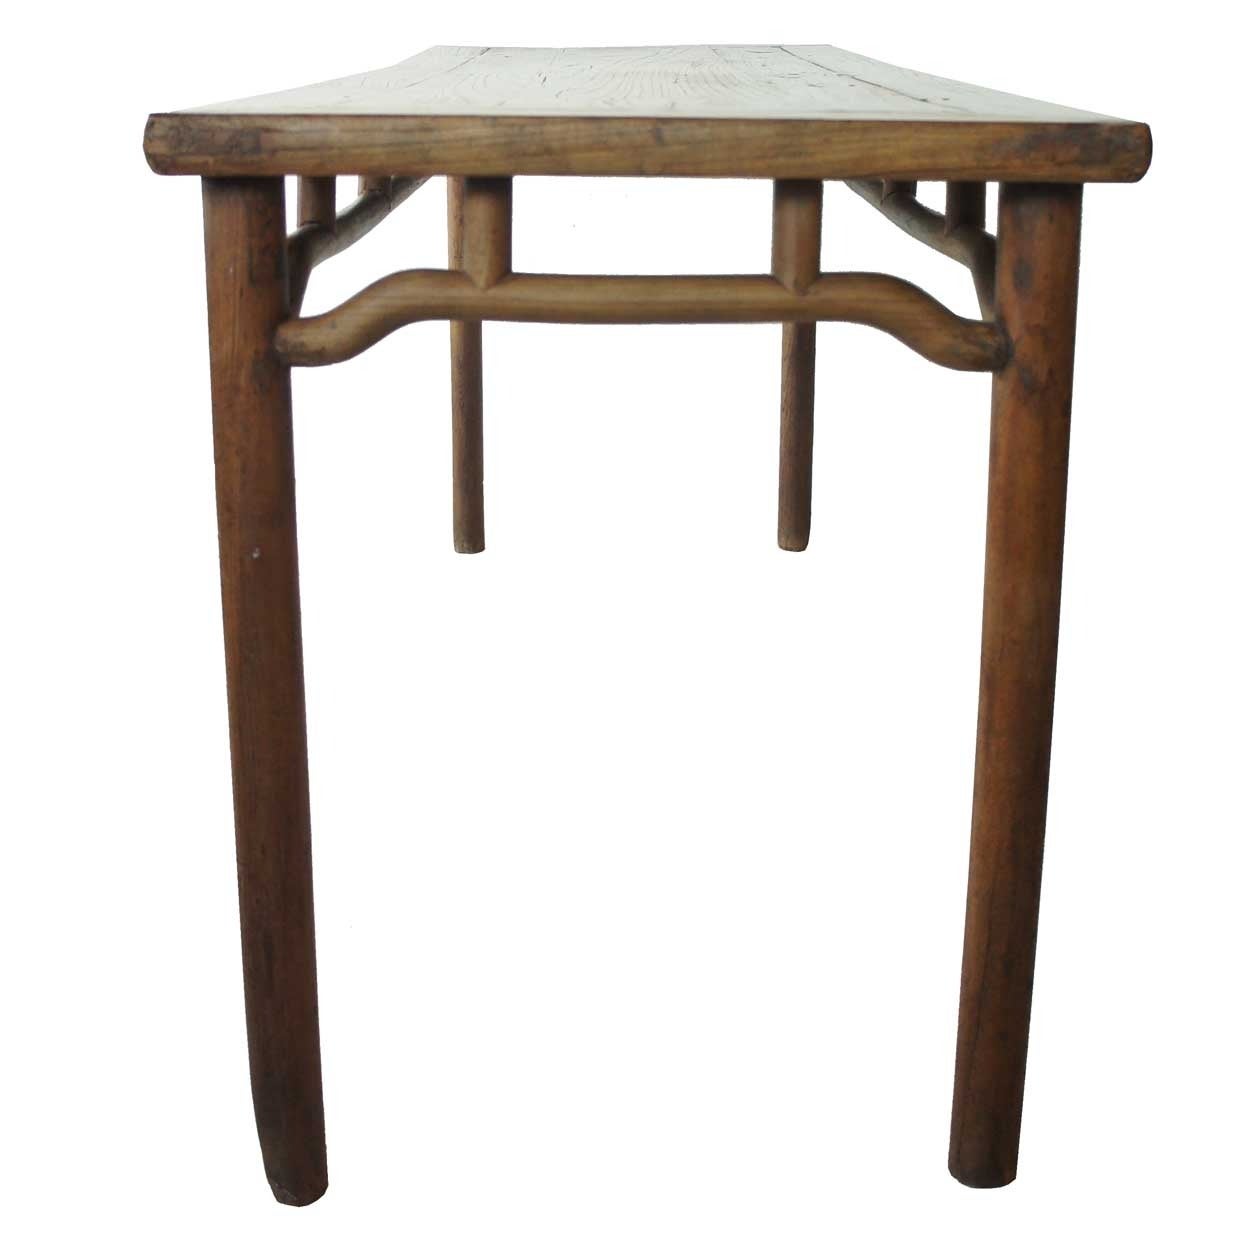 Qing dynasty (1644-1912).
This early, antique Chinese table was handcrafted and designed with the simplest, almost contemporary lines. It features a floating panel on the top and pole-form legs and box and humpback, H-stretchers that form an open